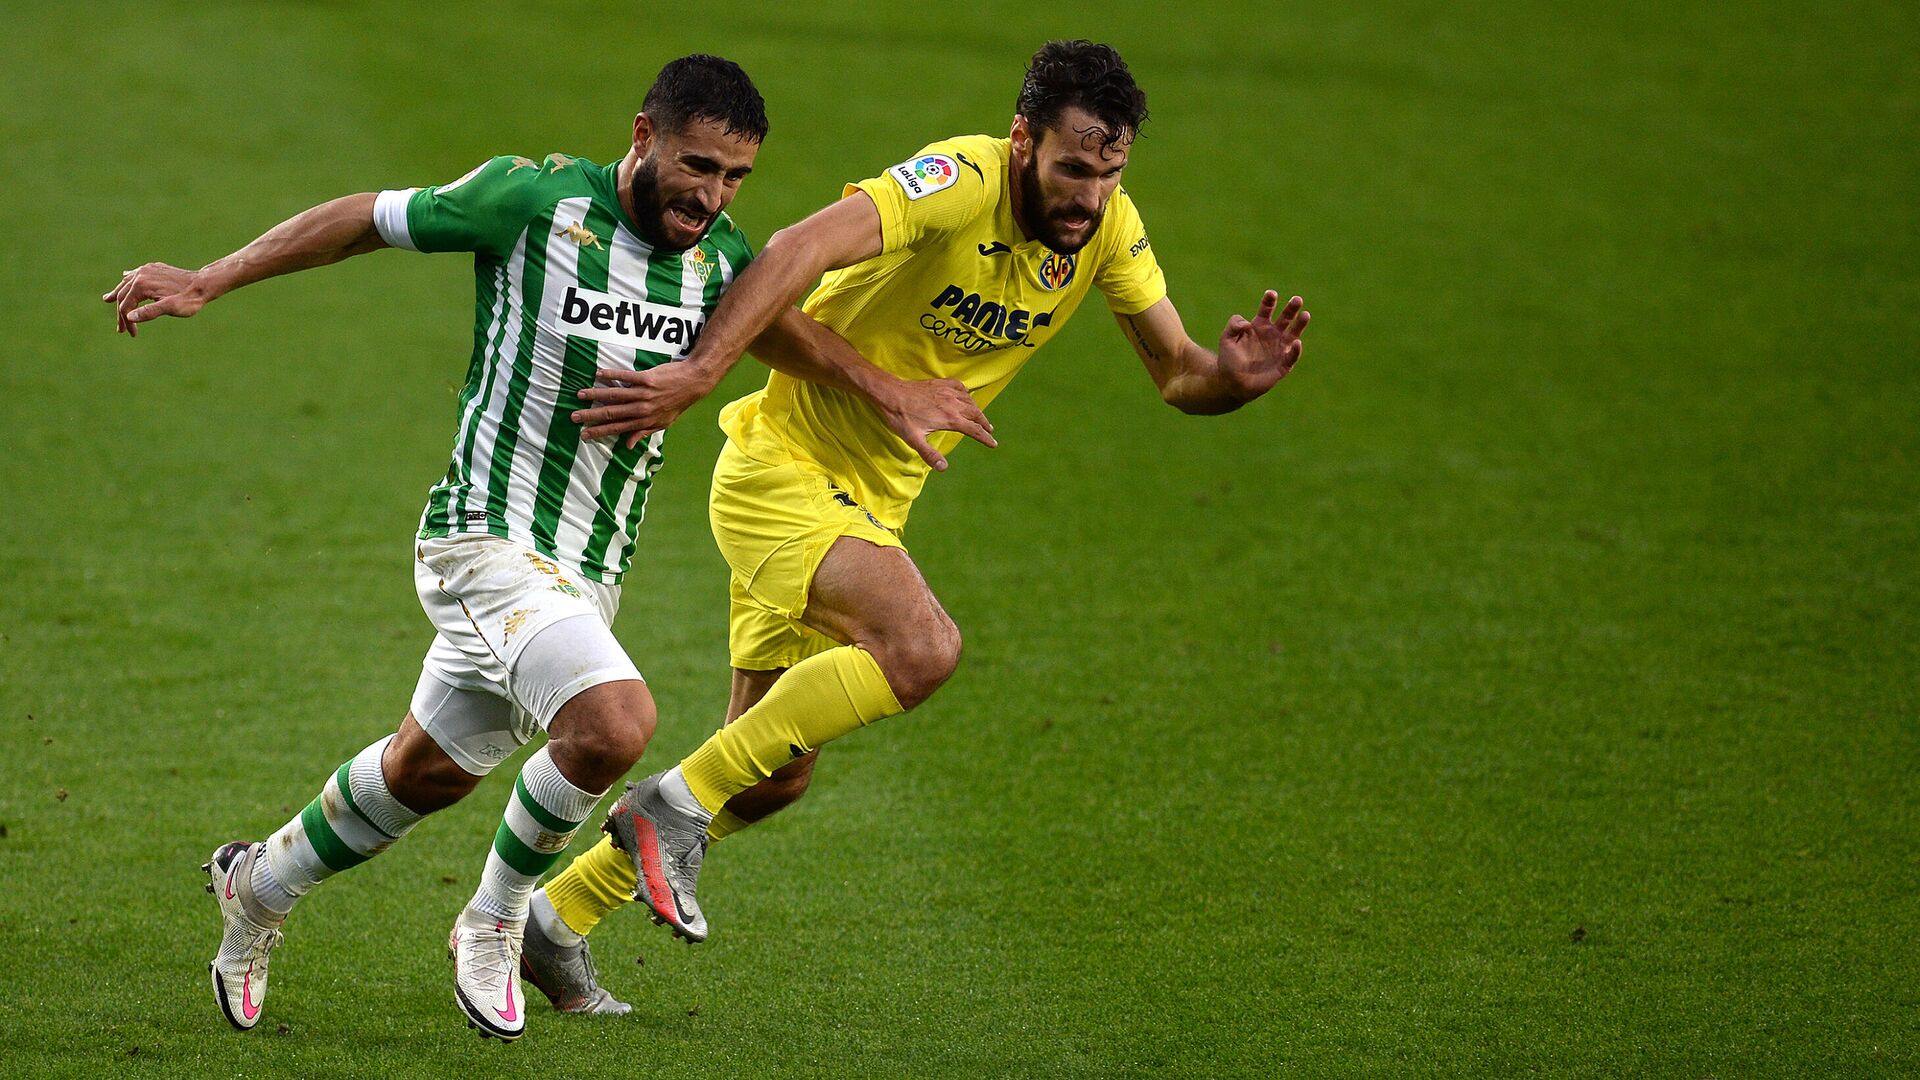 Villarreal's Spanish defender Alfonso Pedraza (R) vies for the ball with Real Betis' French midfielder Nabil Fekir during the Spanish league football match between Real Betis and Villarreal CF at the Benito Villamarin stadium in Seville on December 13, 2020. (Photo by CRISTINA QUICLER / AFP) - РИА Новости, 1920, 13.12.2020